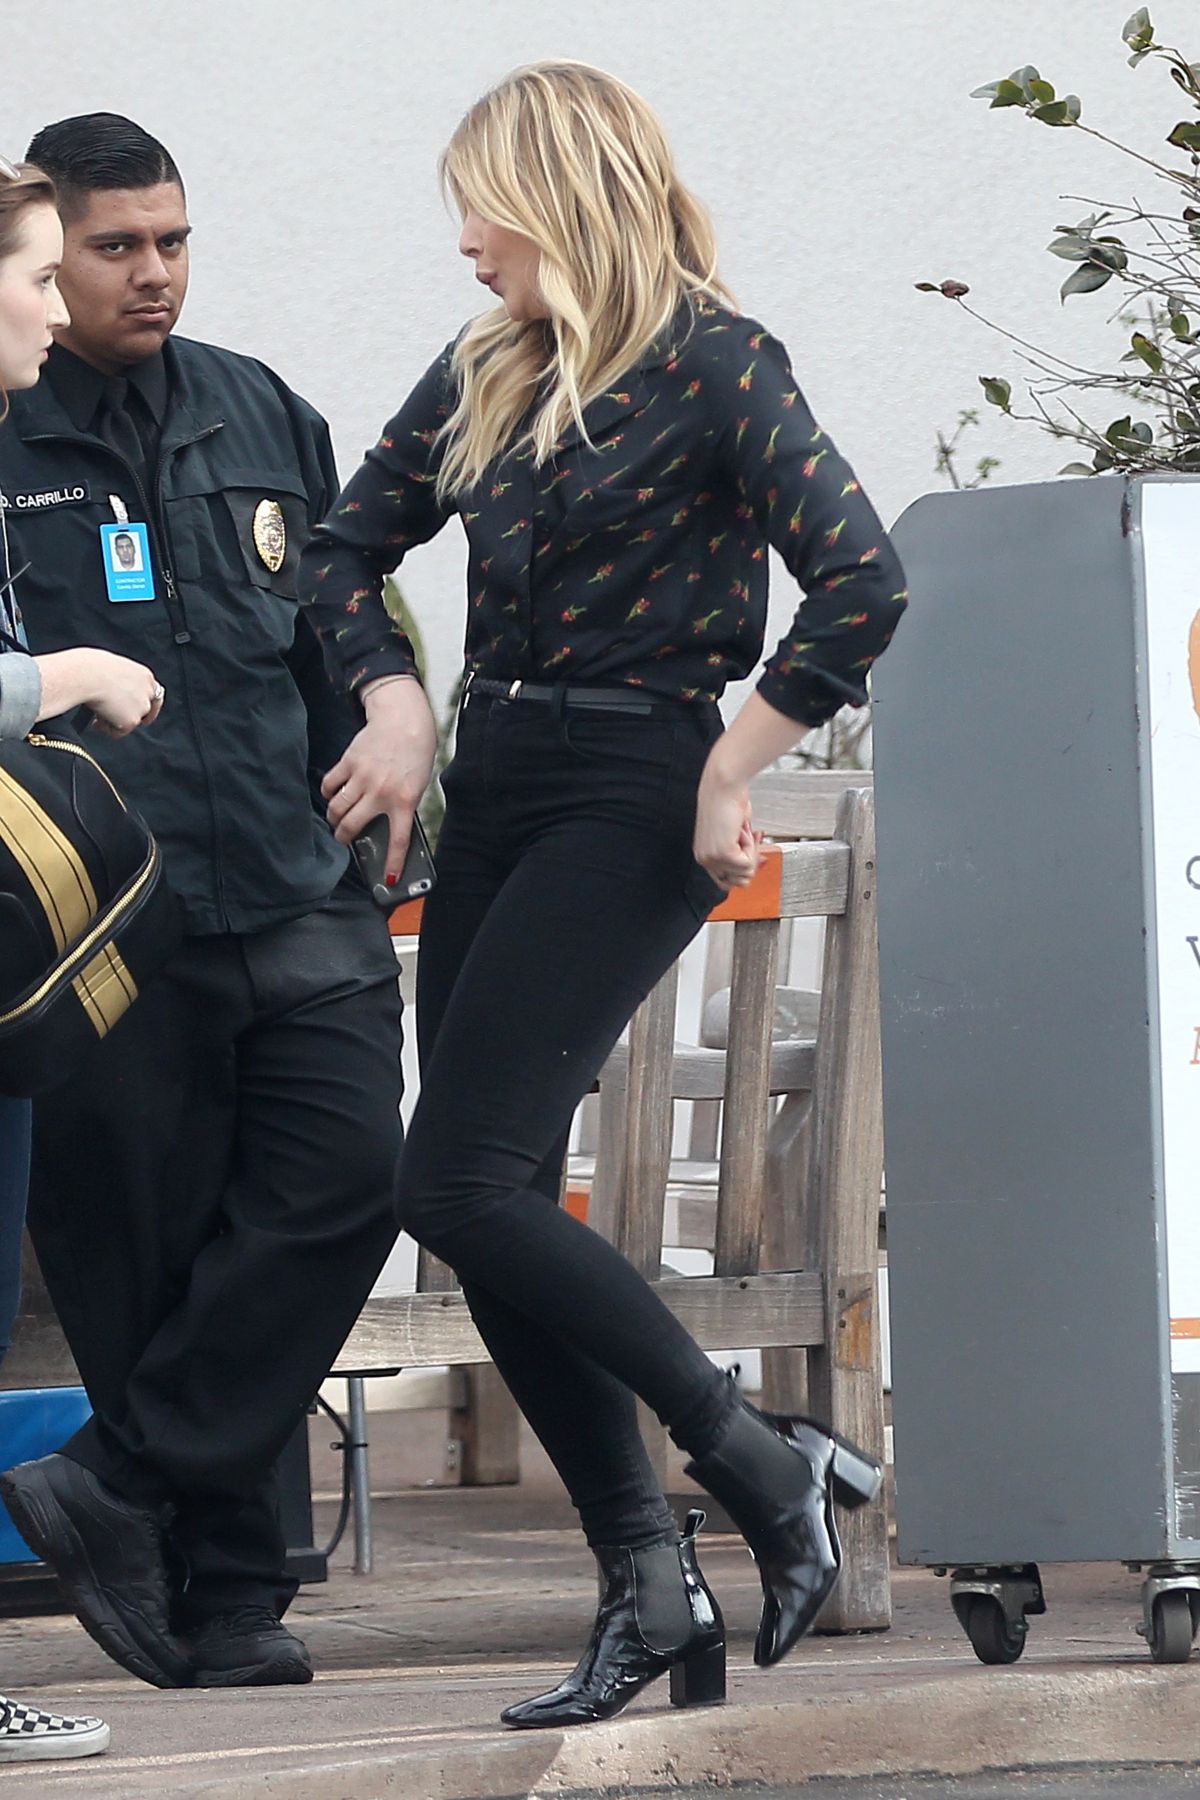 CHLOE MORETZ Out and Abour in Los Angeles 06/03/2015 – HawtCelebs